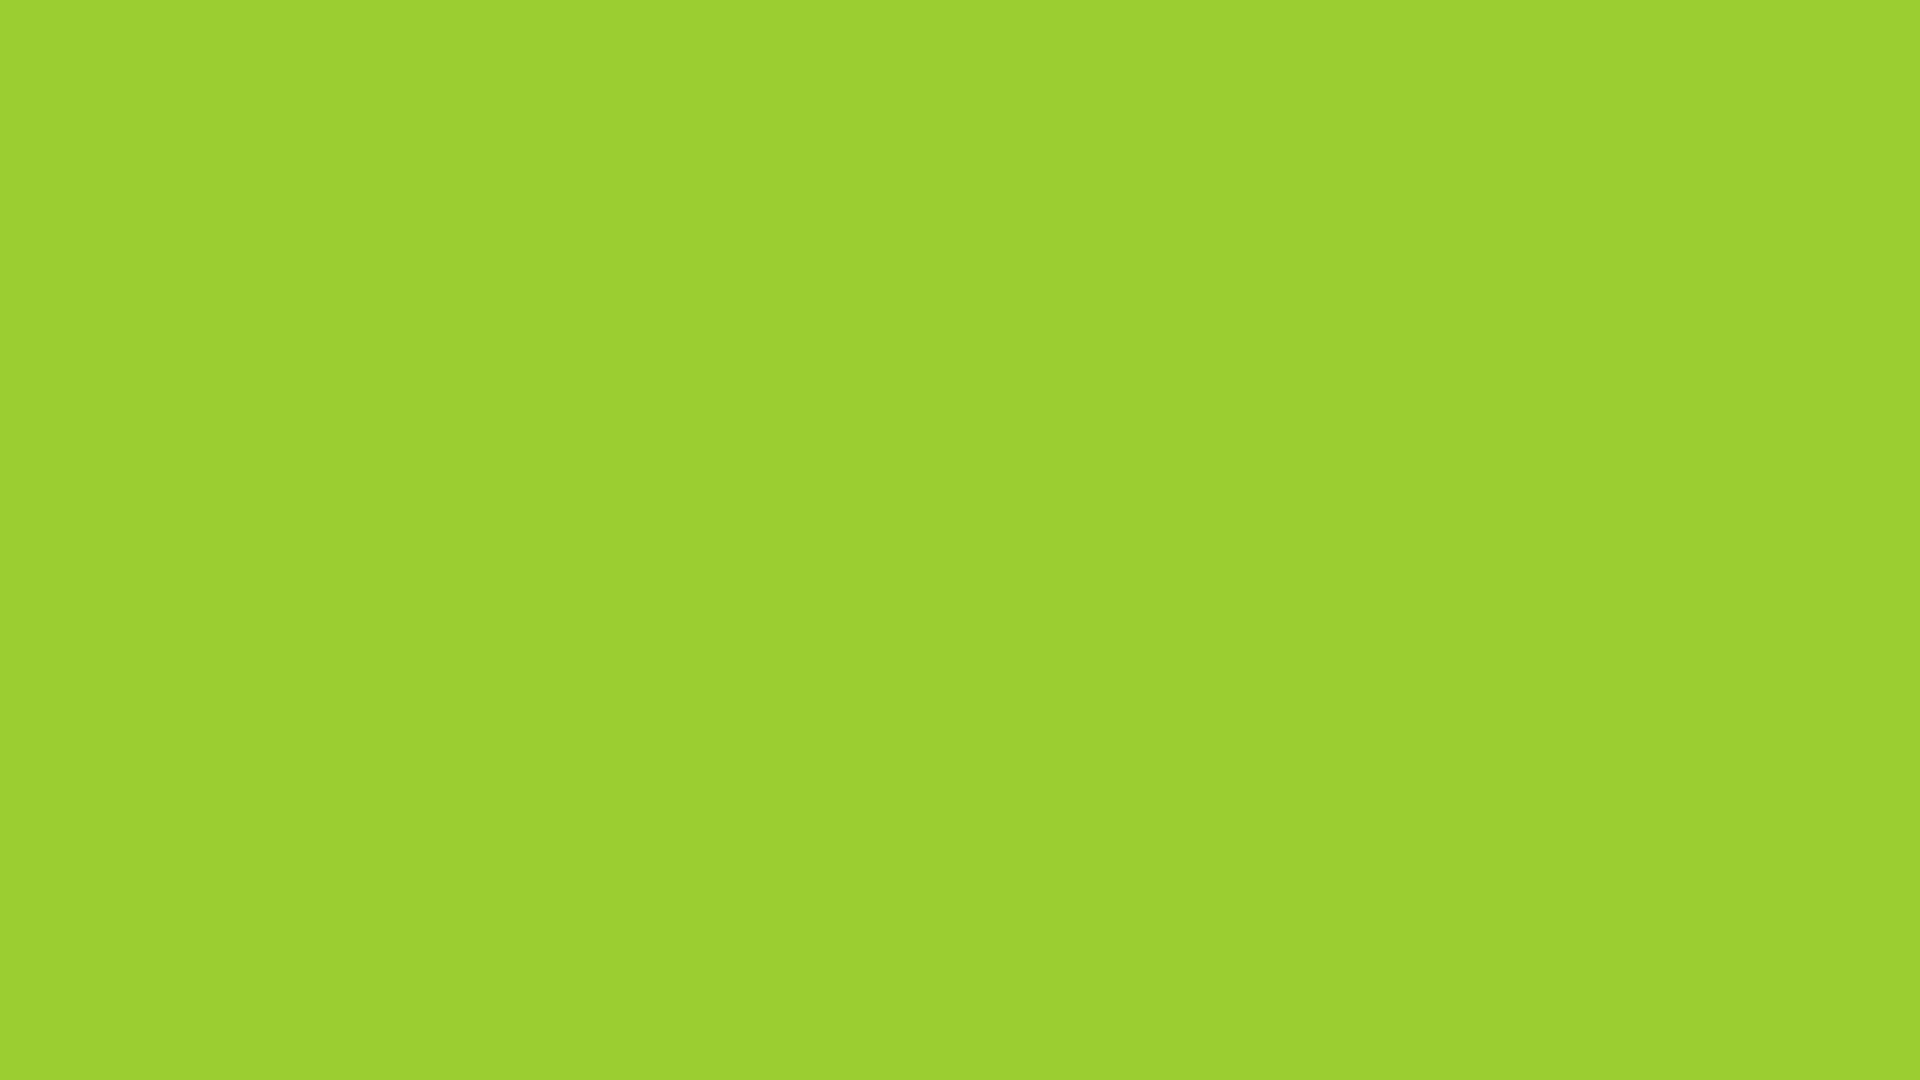 1920x1080 Yellow-green Solid Color Background